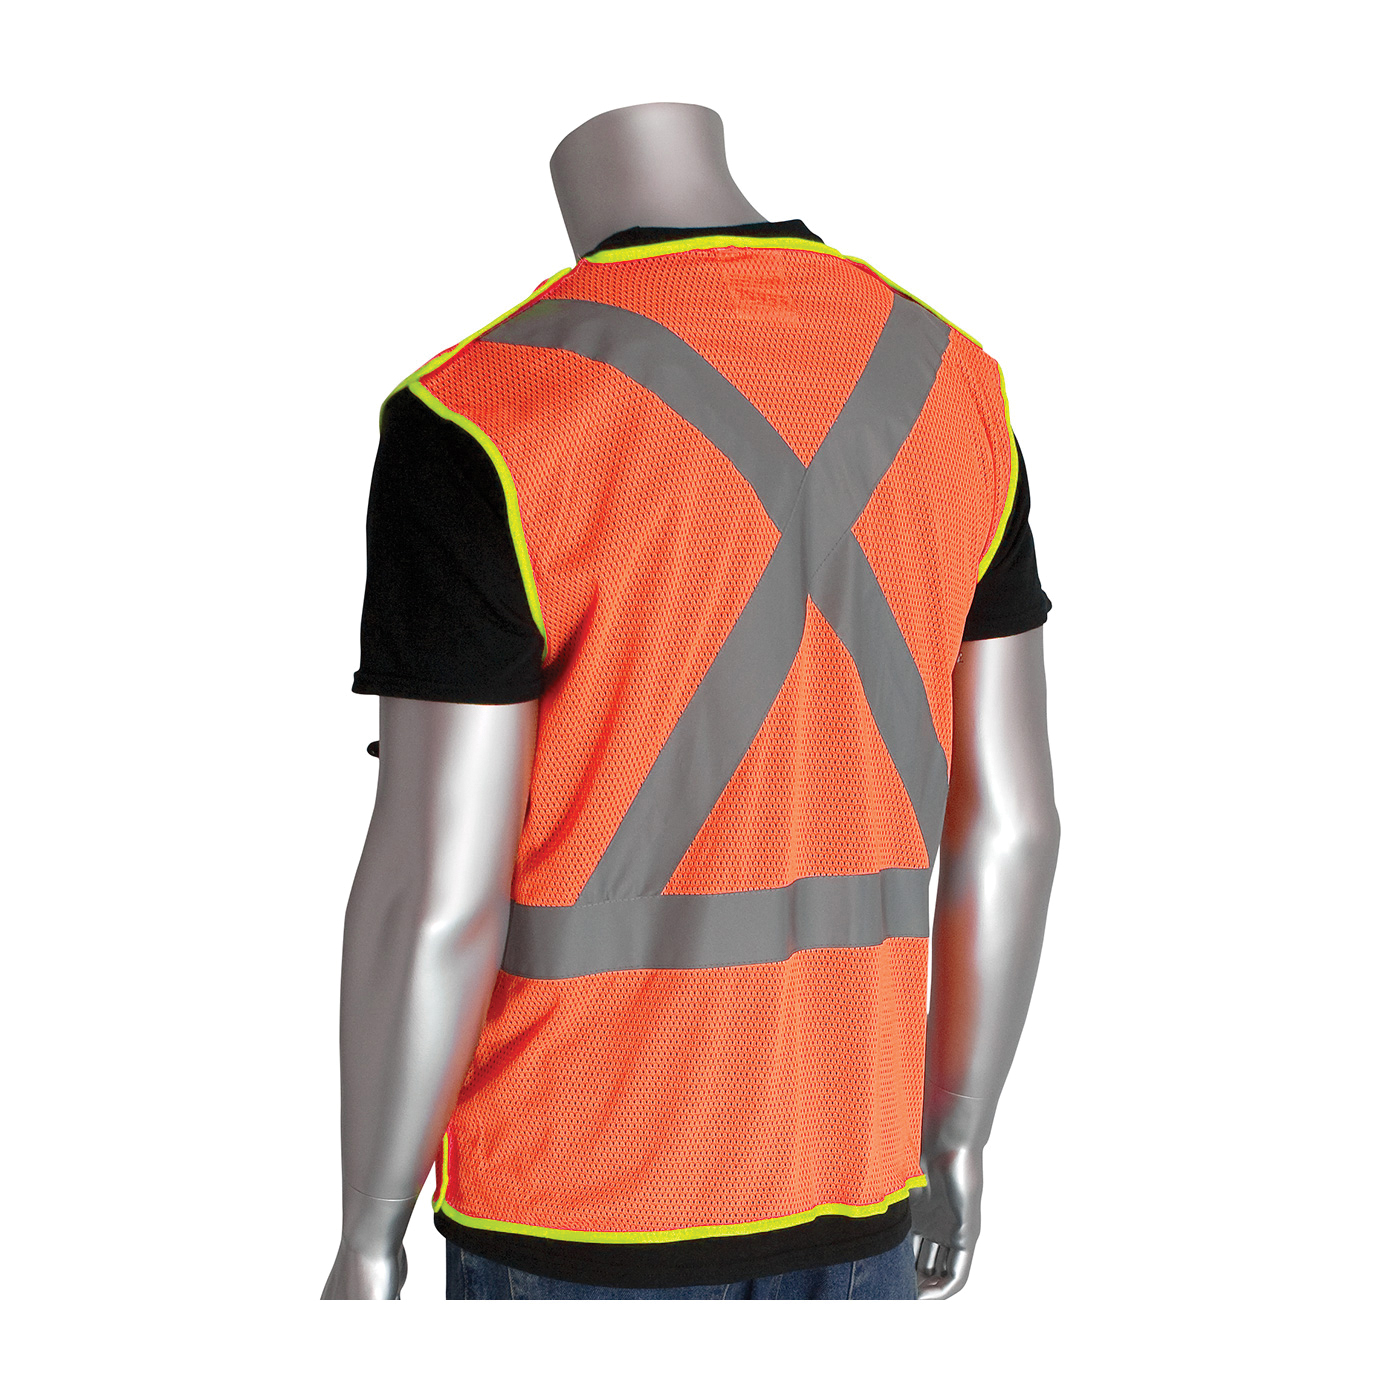 PIP® 302-0210-OR X-Back Safety Vest, Hi-Viz Orange, Polyester, Hook and Loop Closure, 3 Pockets, ANSI Class: Class 2, Specifications Met: ANSI 107 Type R, CAN/CSA Z96